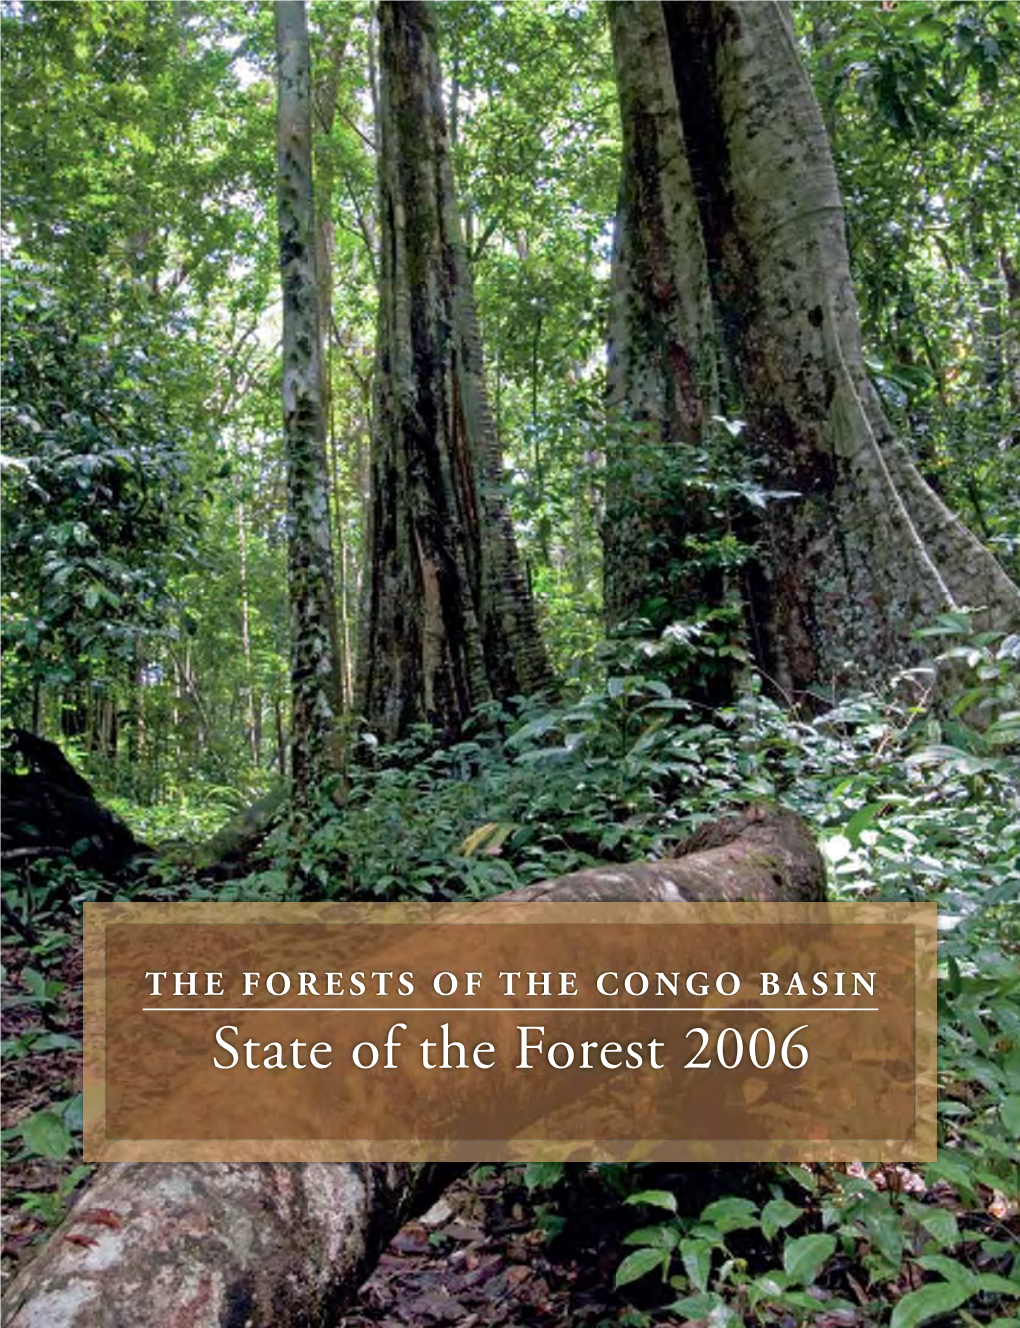 State of the Forest 2006 the FORESTS of the CONGO BASIN